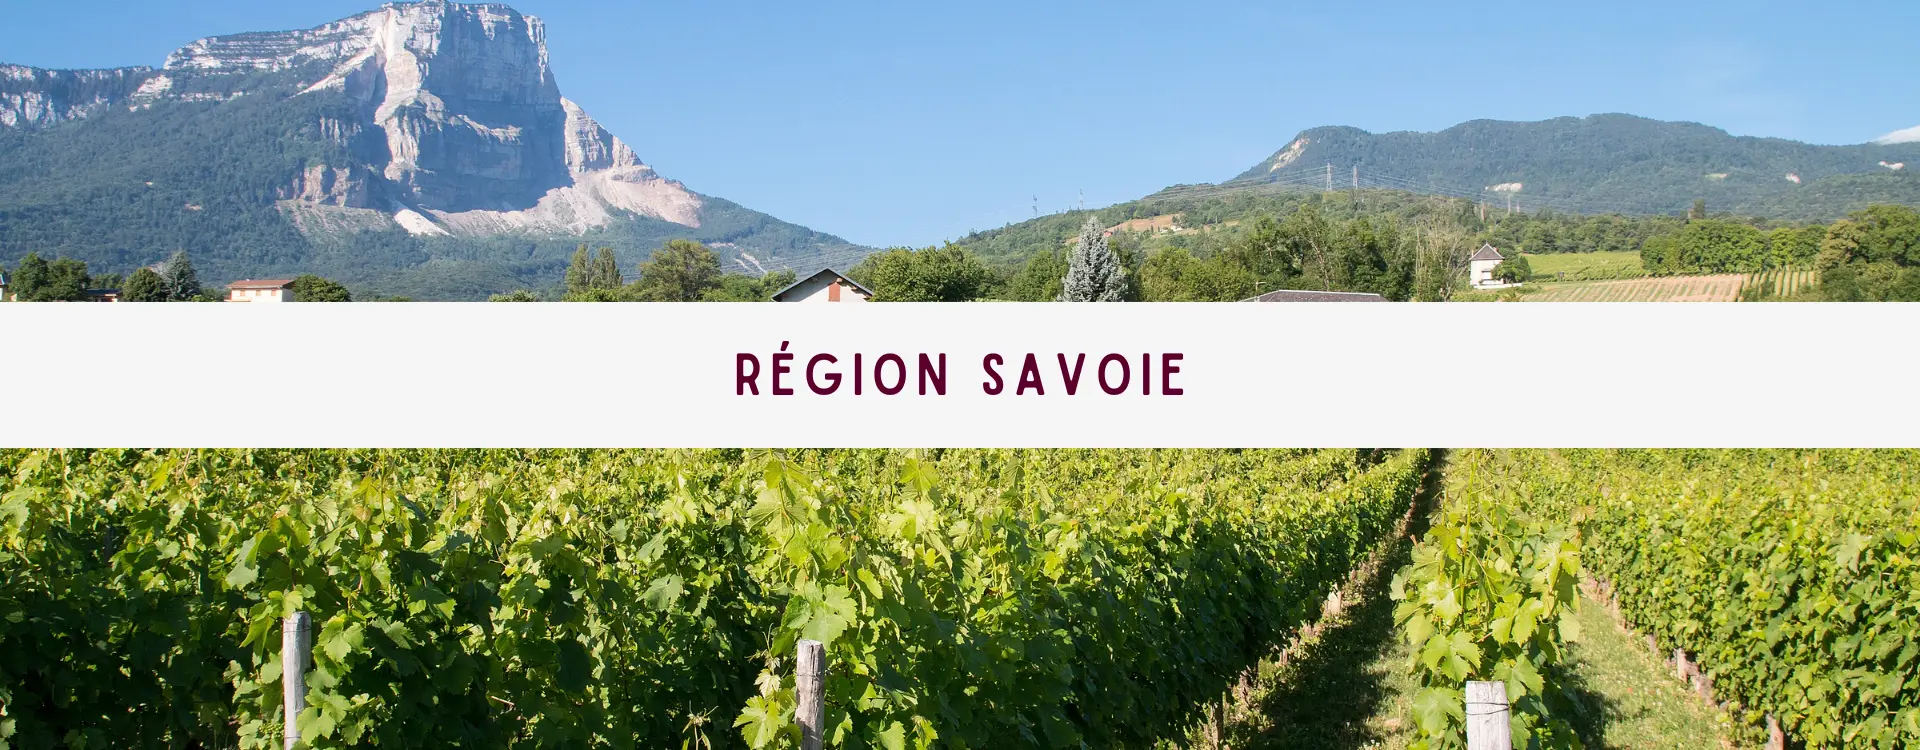 You are currently viewing La Région Savoie